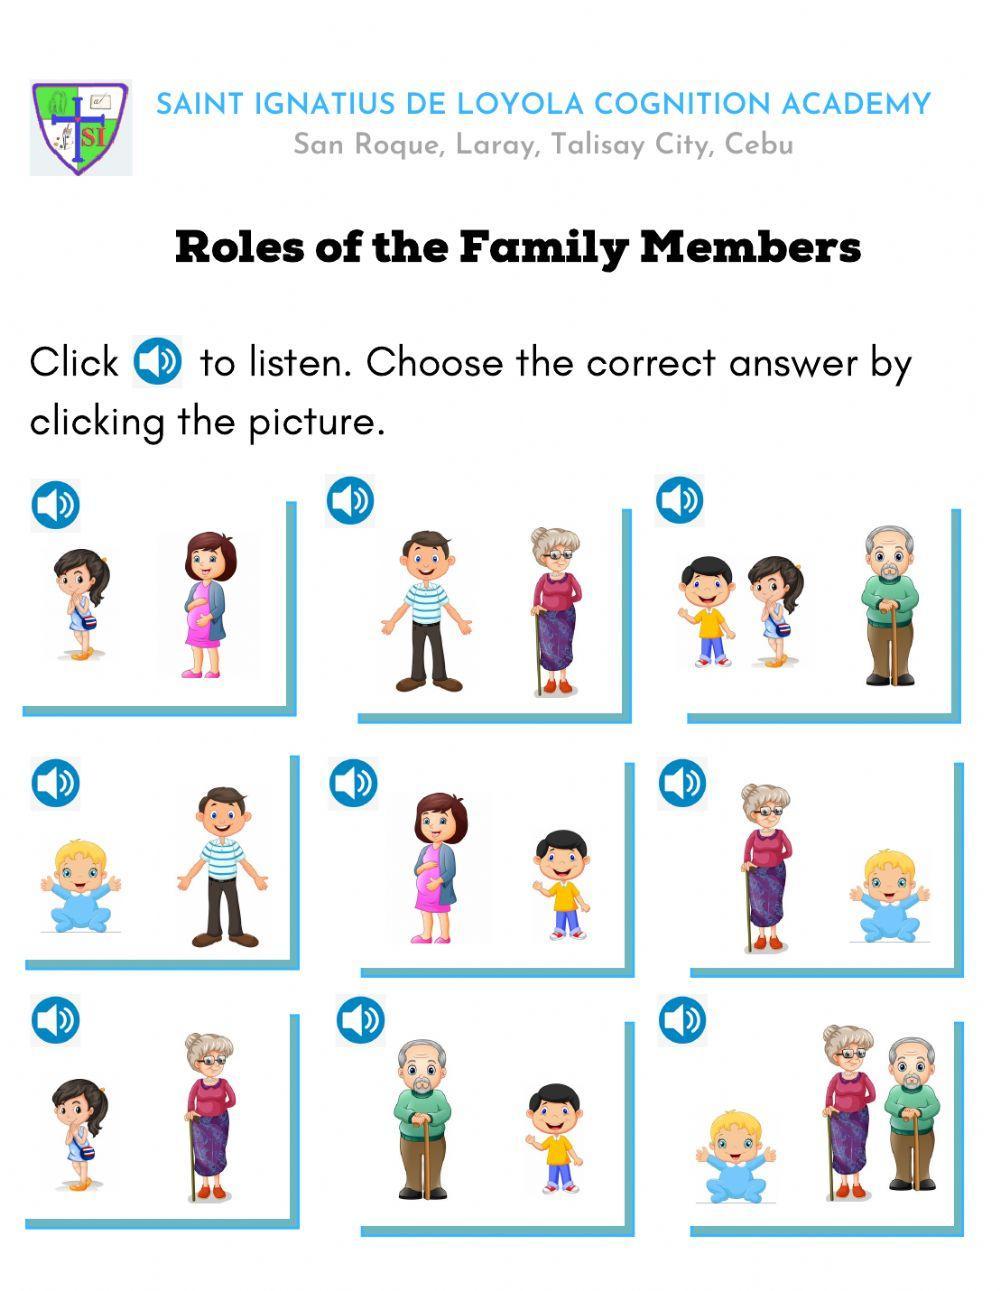 Roles of the Family Members